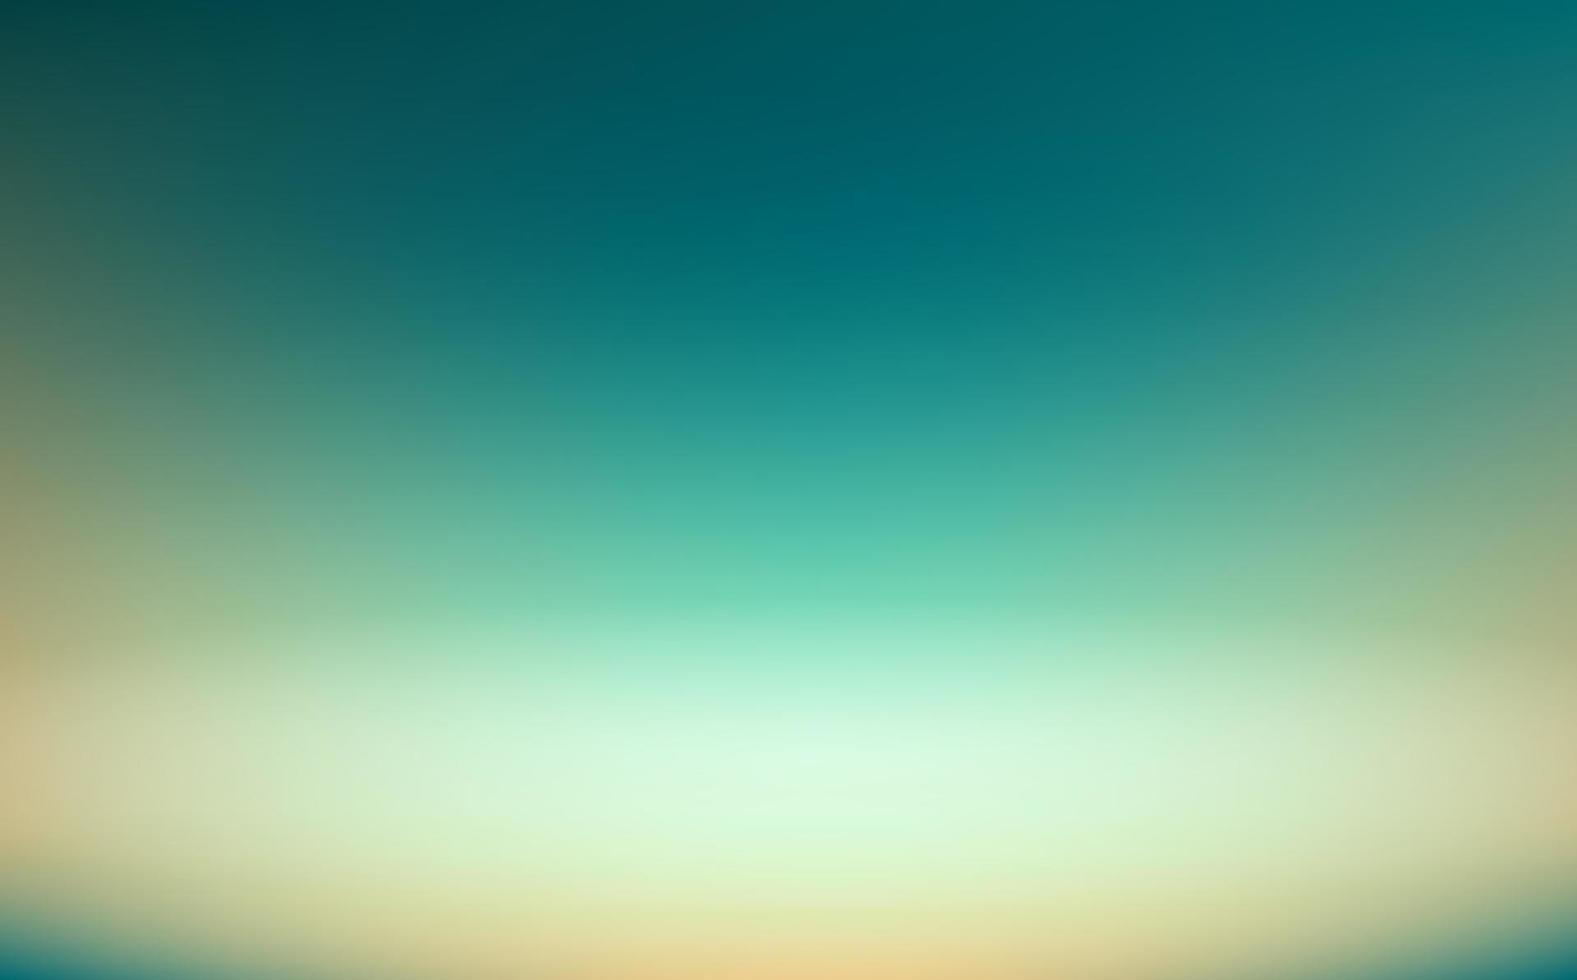 Horizon in the moring sunrise abstract background vector